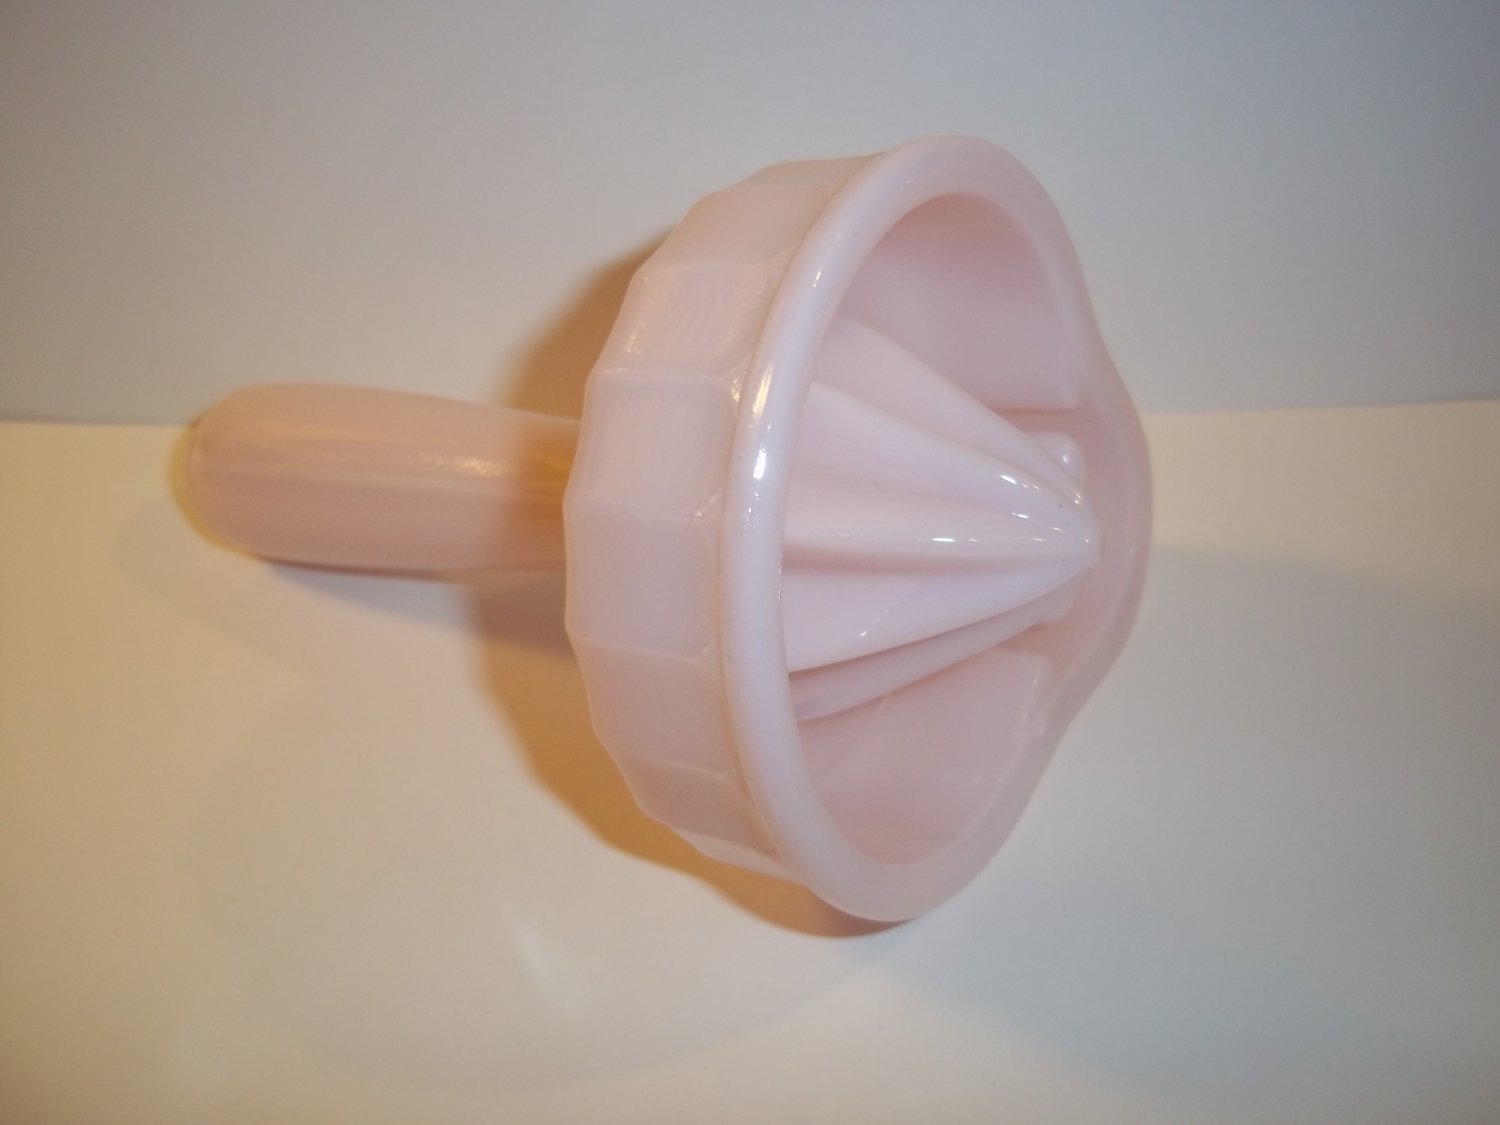 Mosser Glass PINK OPAQUE HAND-HELD RETRO Lemon Lime JUICER REAMER Made In USA!